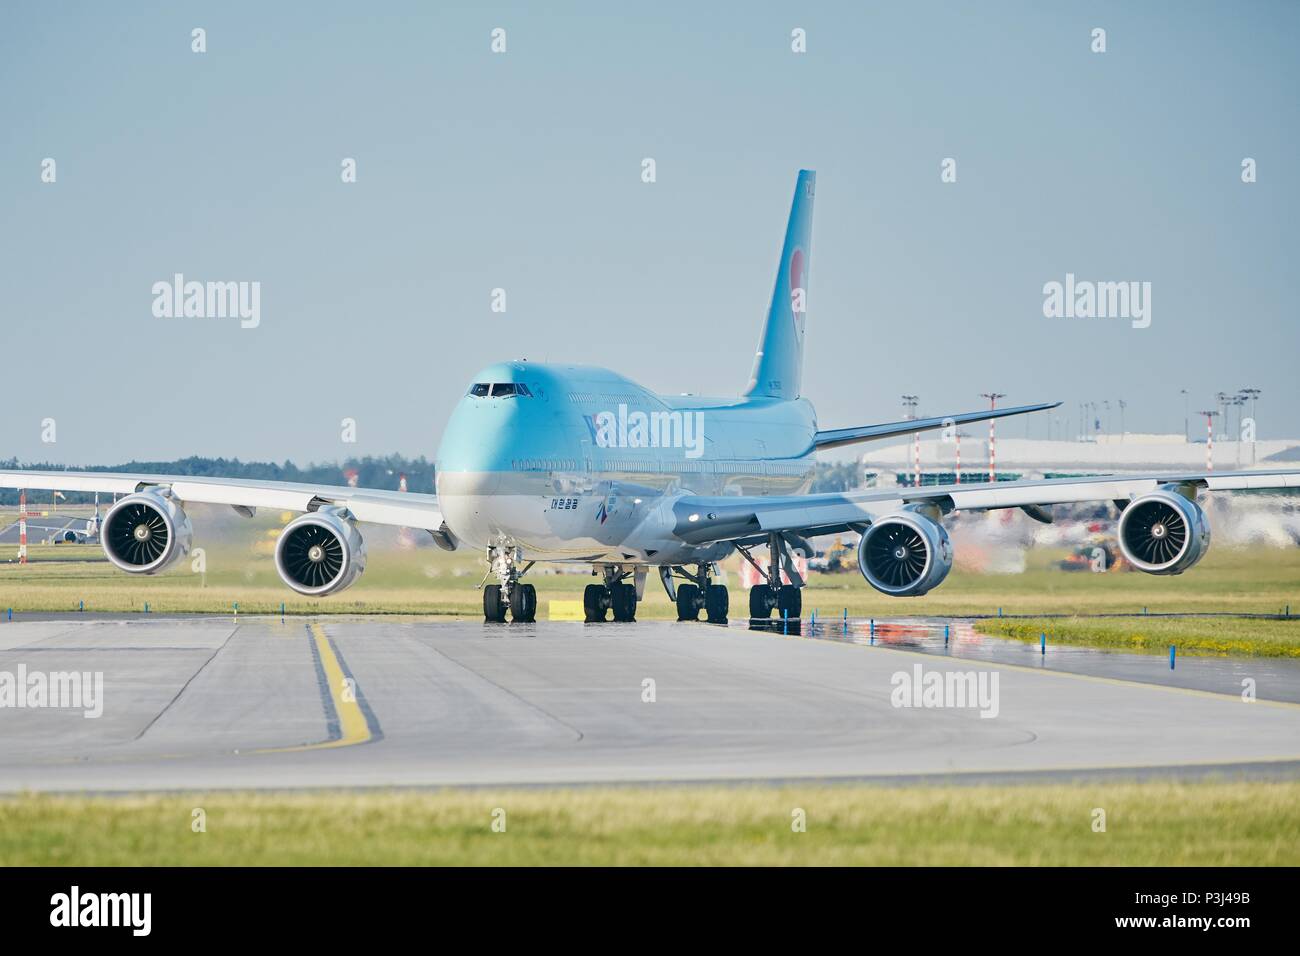 Prague, Czech Republic - June 16, 2018: Boeing 747-8i of Korean Air is taxiing to runway at Vaclav Havel Prague Airport on June 16, 2018. Stock Photo